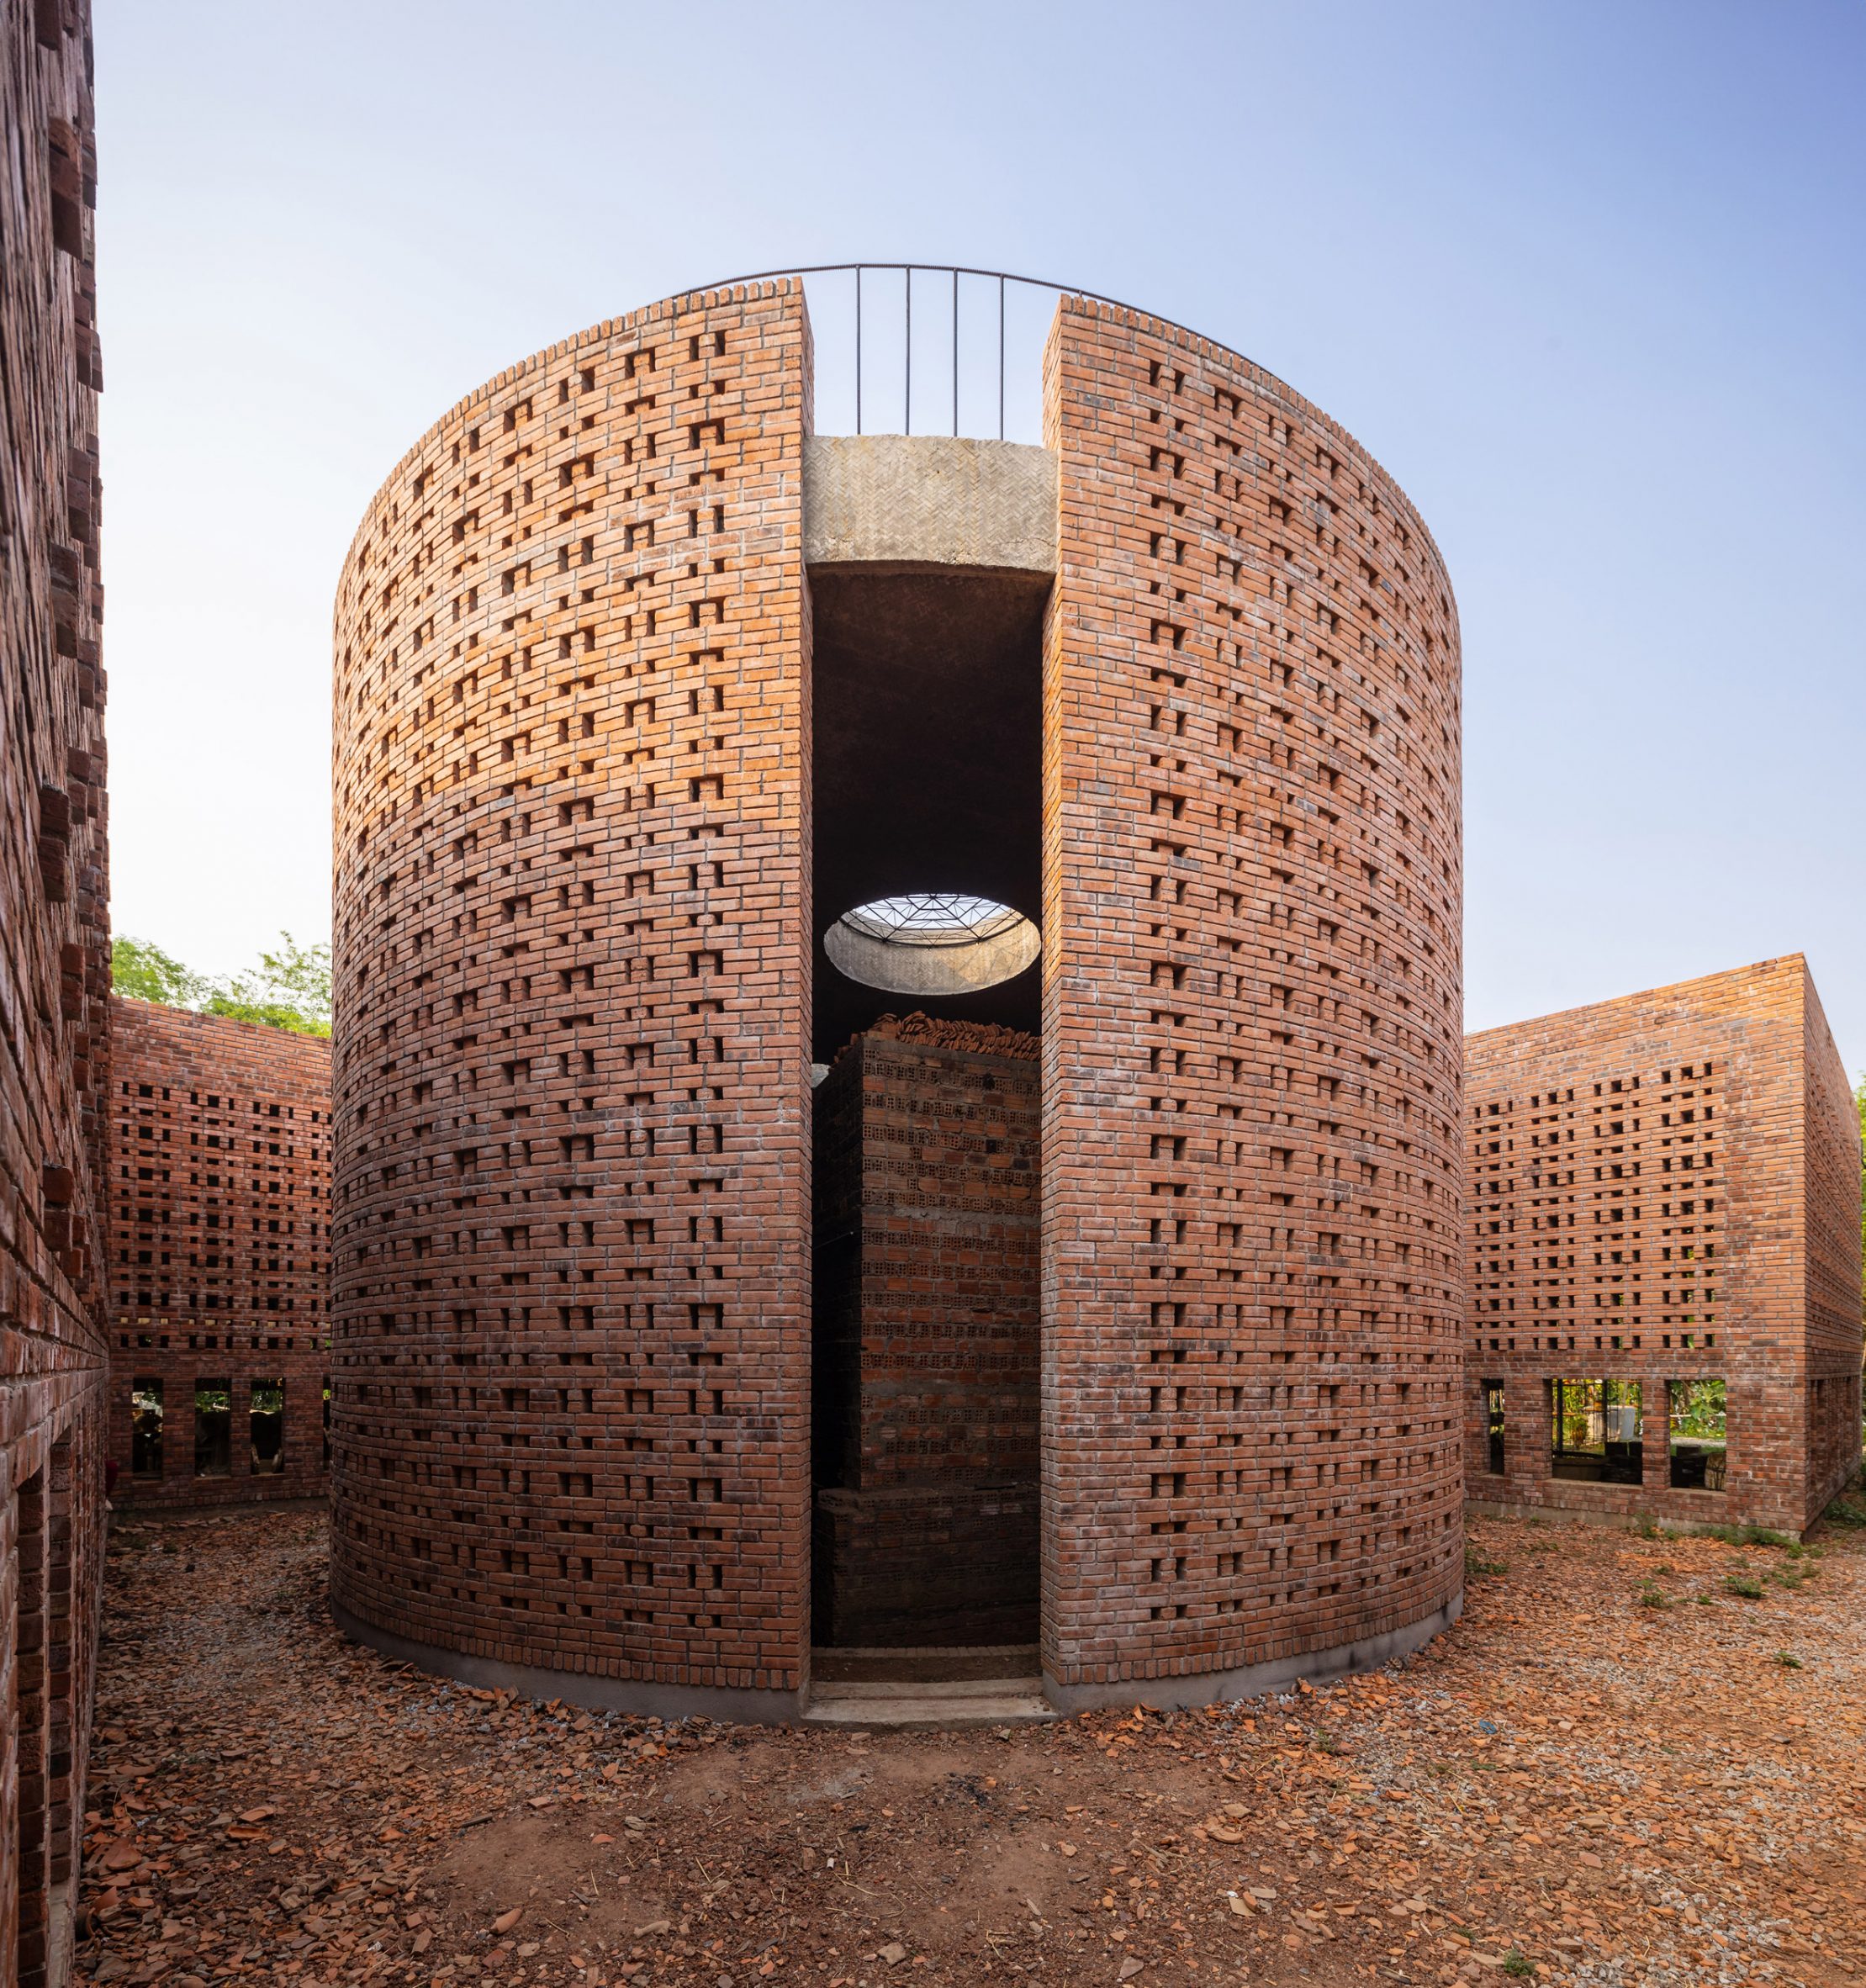 Cylindrical structure within the Terra Cotta Workshop in Vietnam